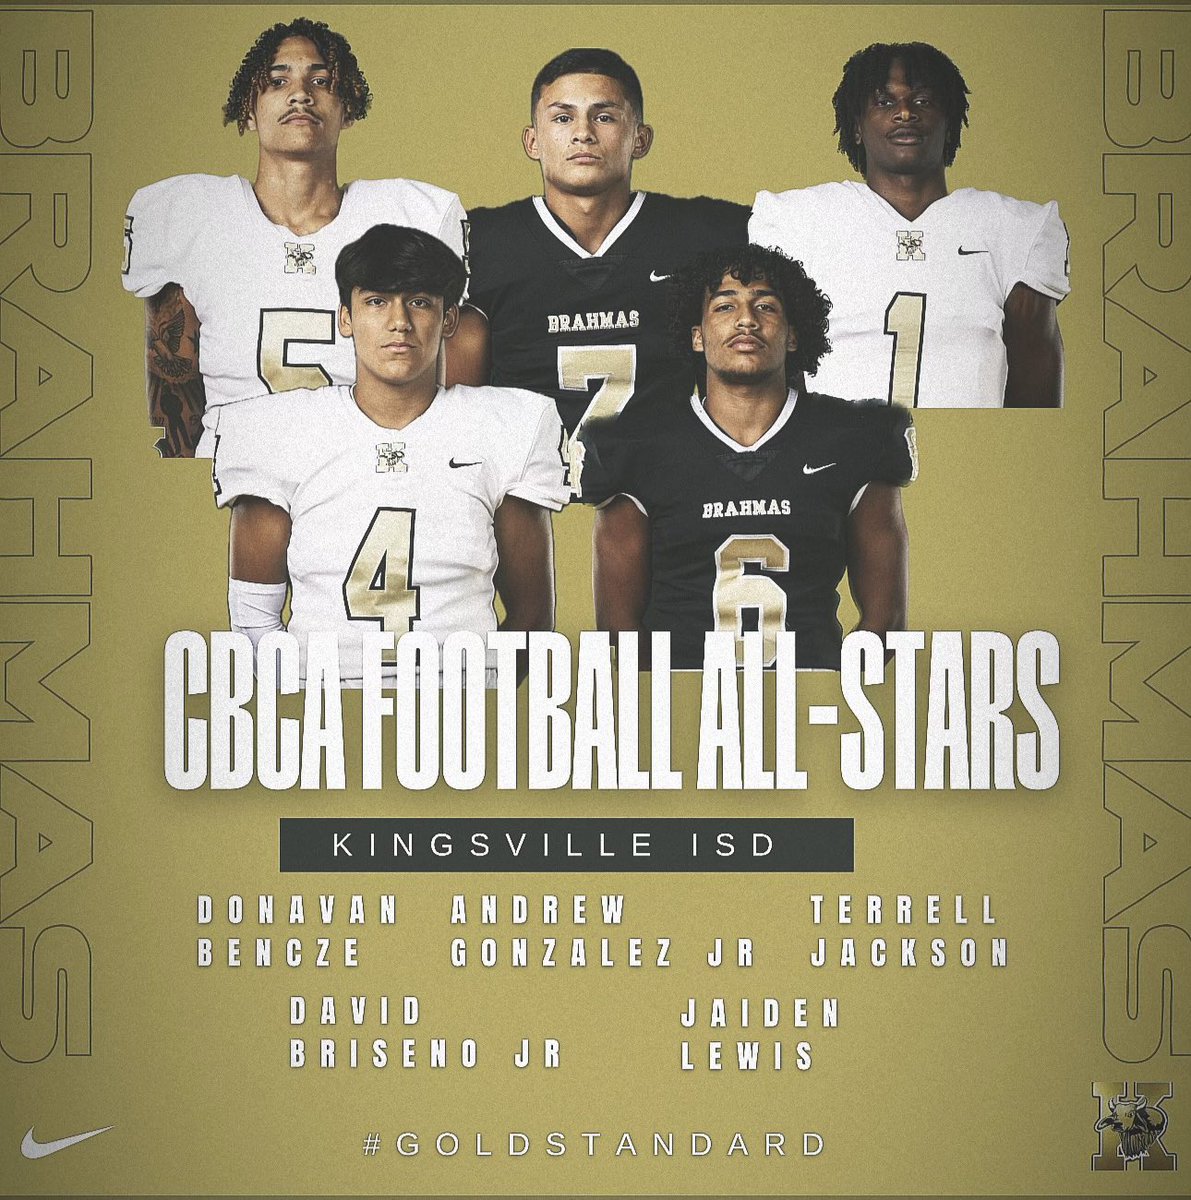 Congratulations to these seniors on being selected to play in the Coastal Bend Coaches Association All-Star Football Game! @cbcatx1 #GoldStandard #BlackReign #braHMaKINGdom